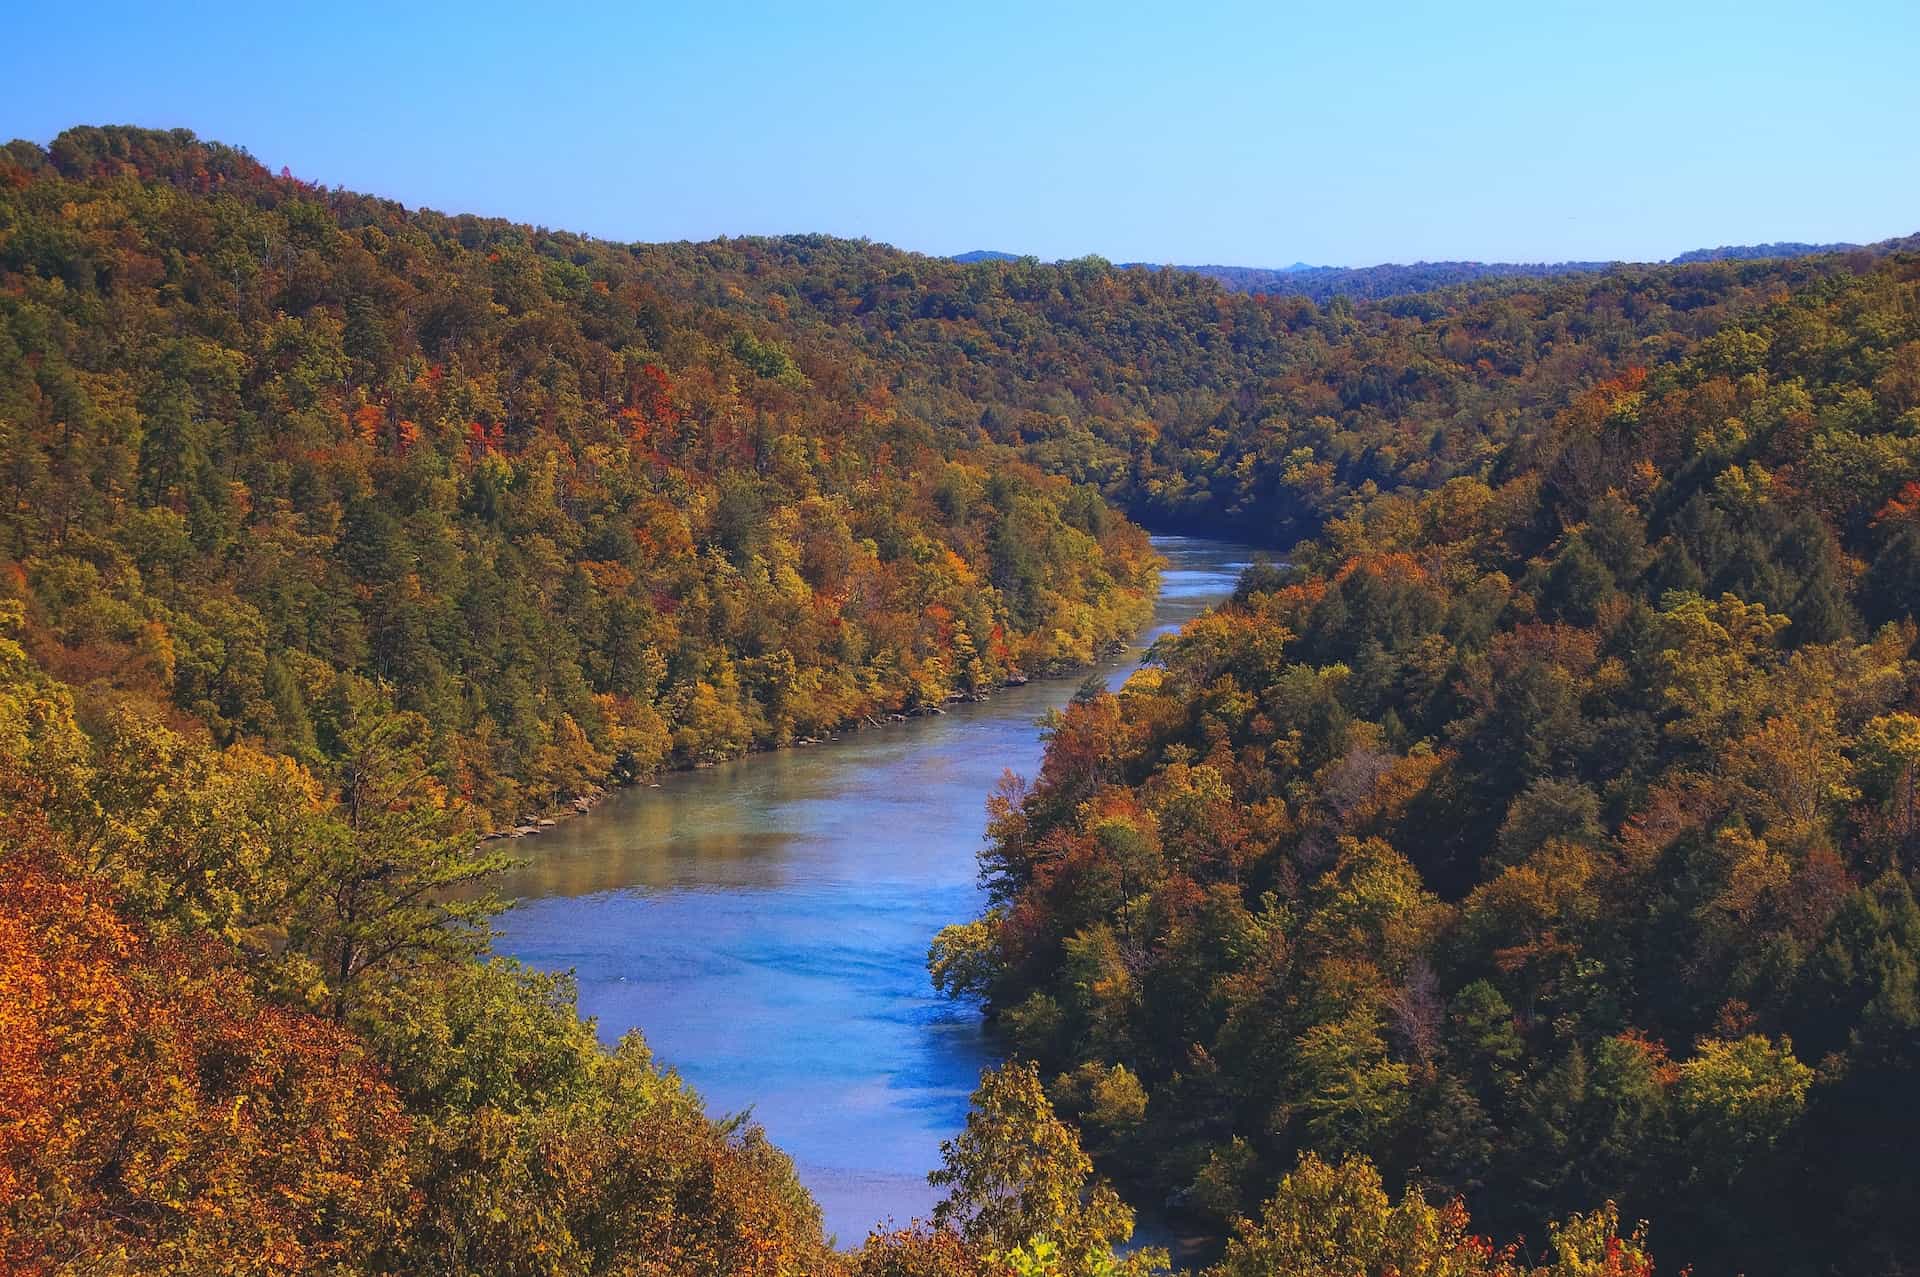 A scenic valley in rural Kentucky, featuring rolling forests changing color in the Fall, as well as a wide river cutting through the valley.